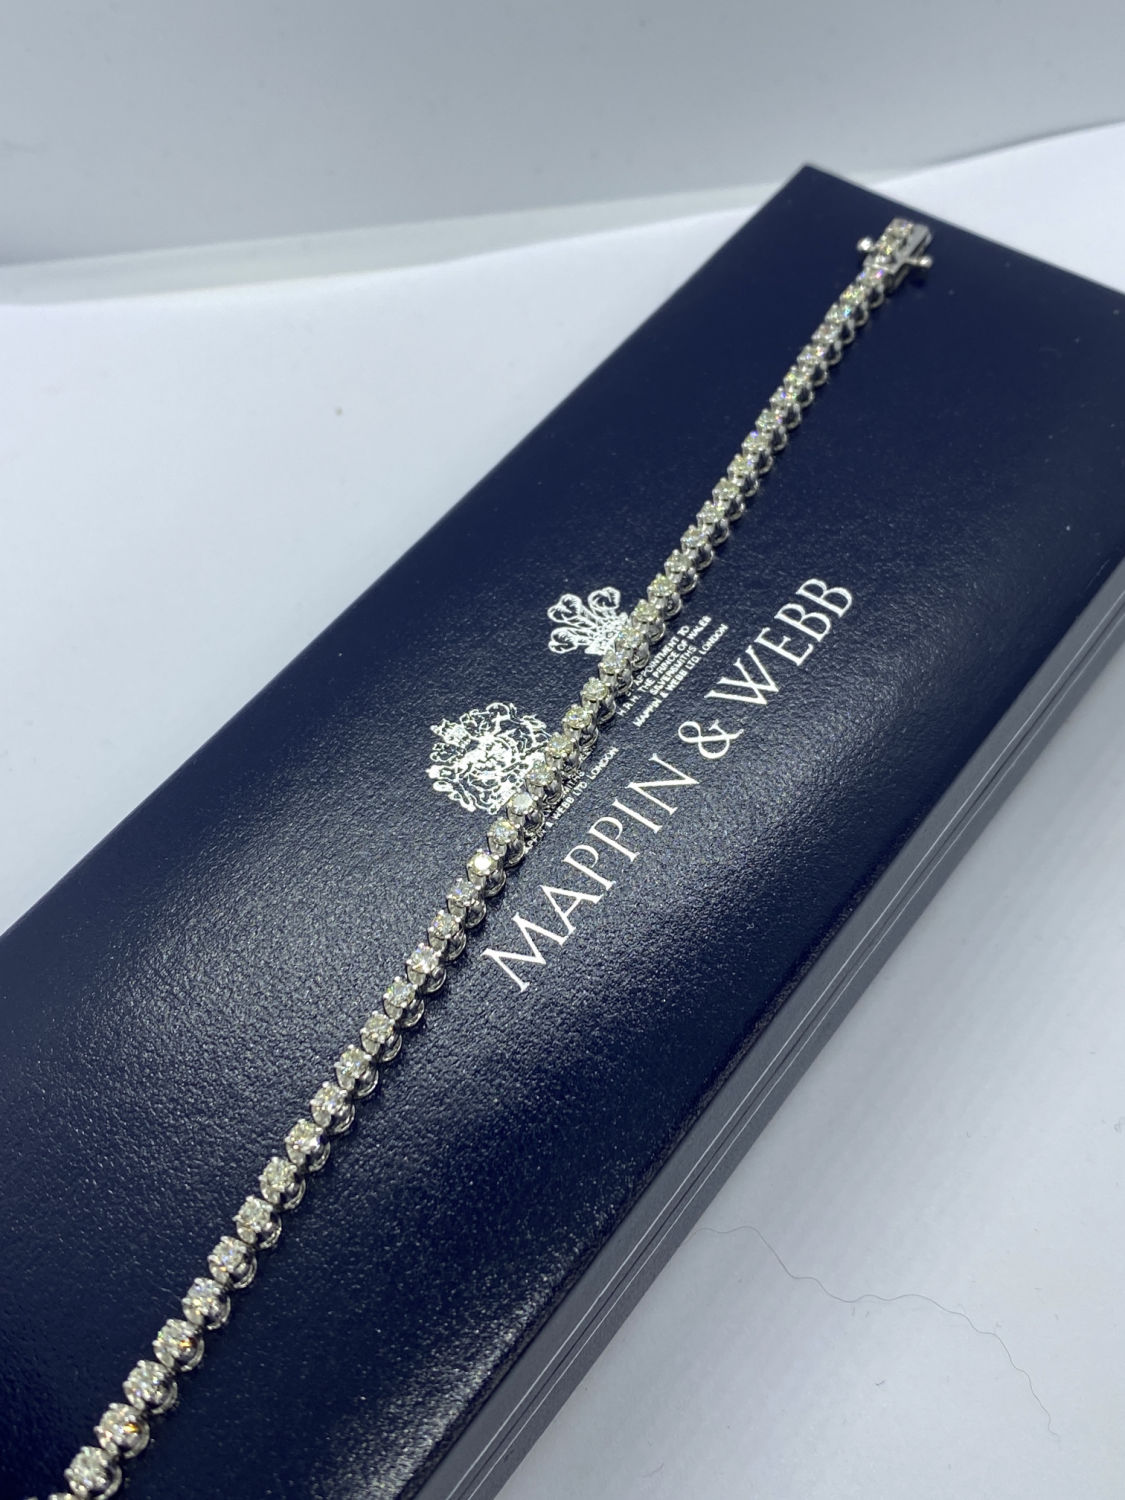 STUNNING 4.00ct DIAMOND TENNIS BRACELET SET IN WHITE GOLD - F/G/H SI1 APPROX - Image 2 of 2